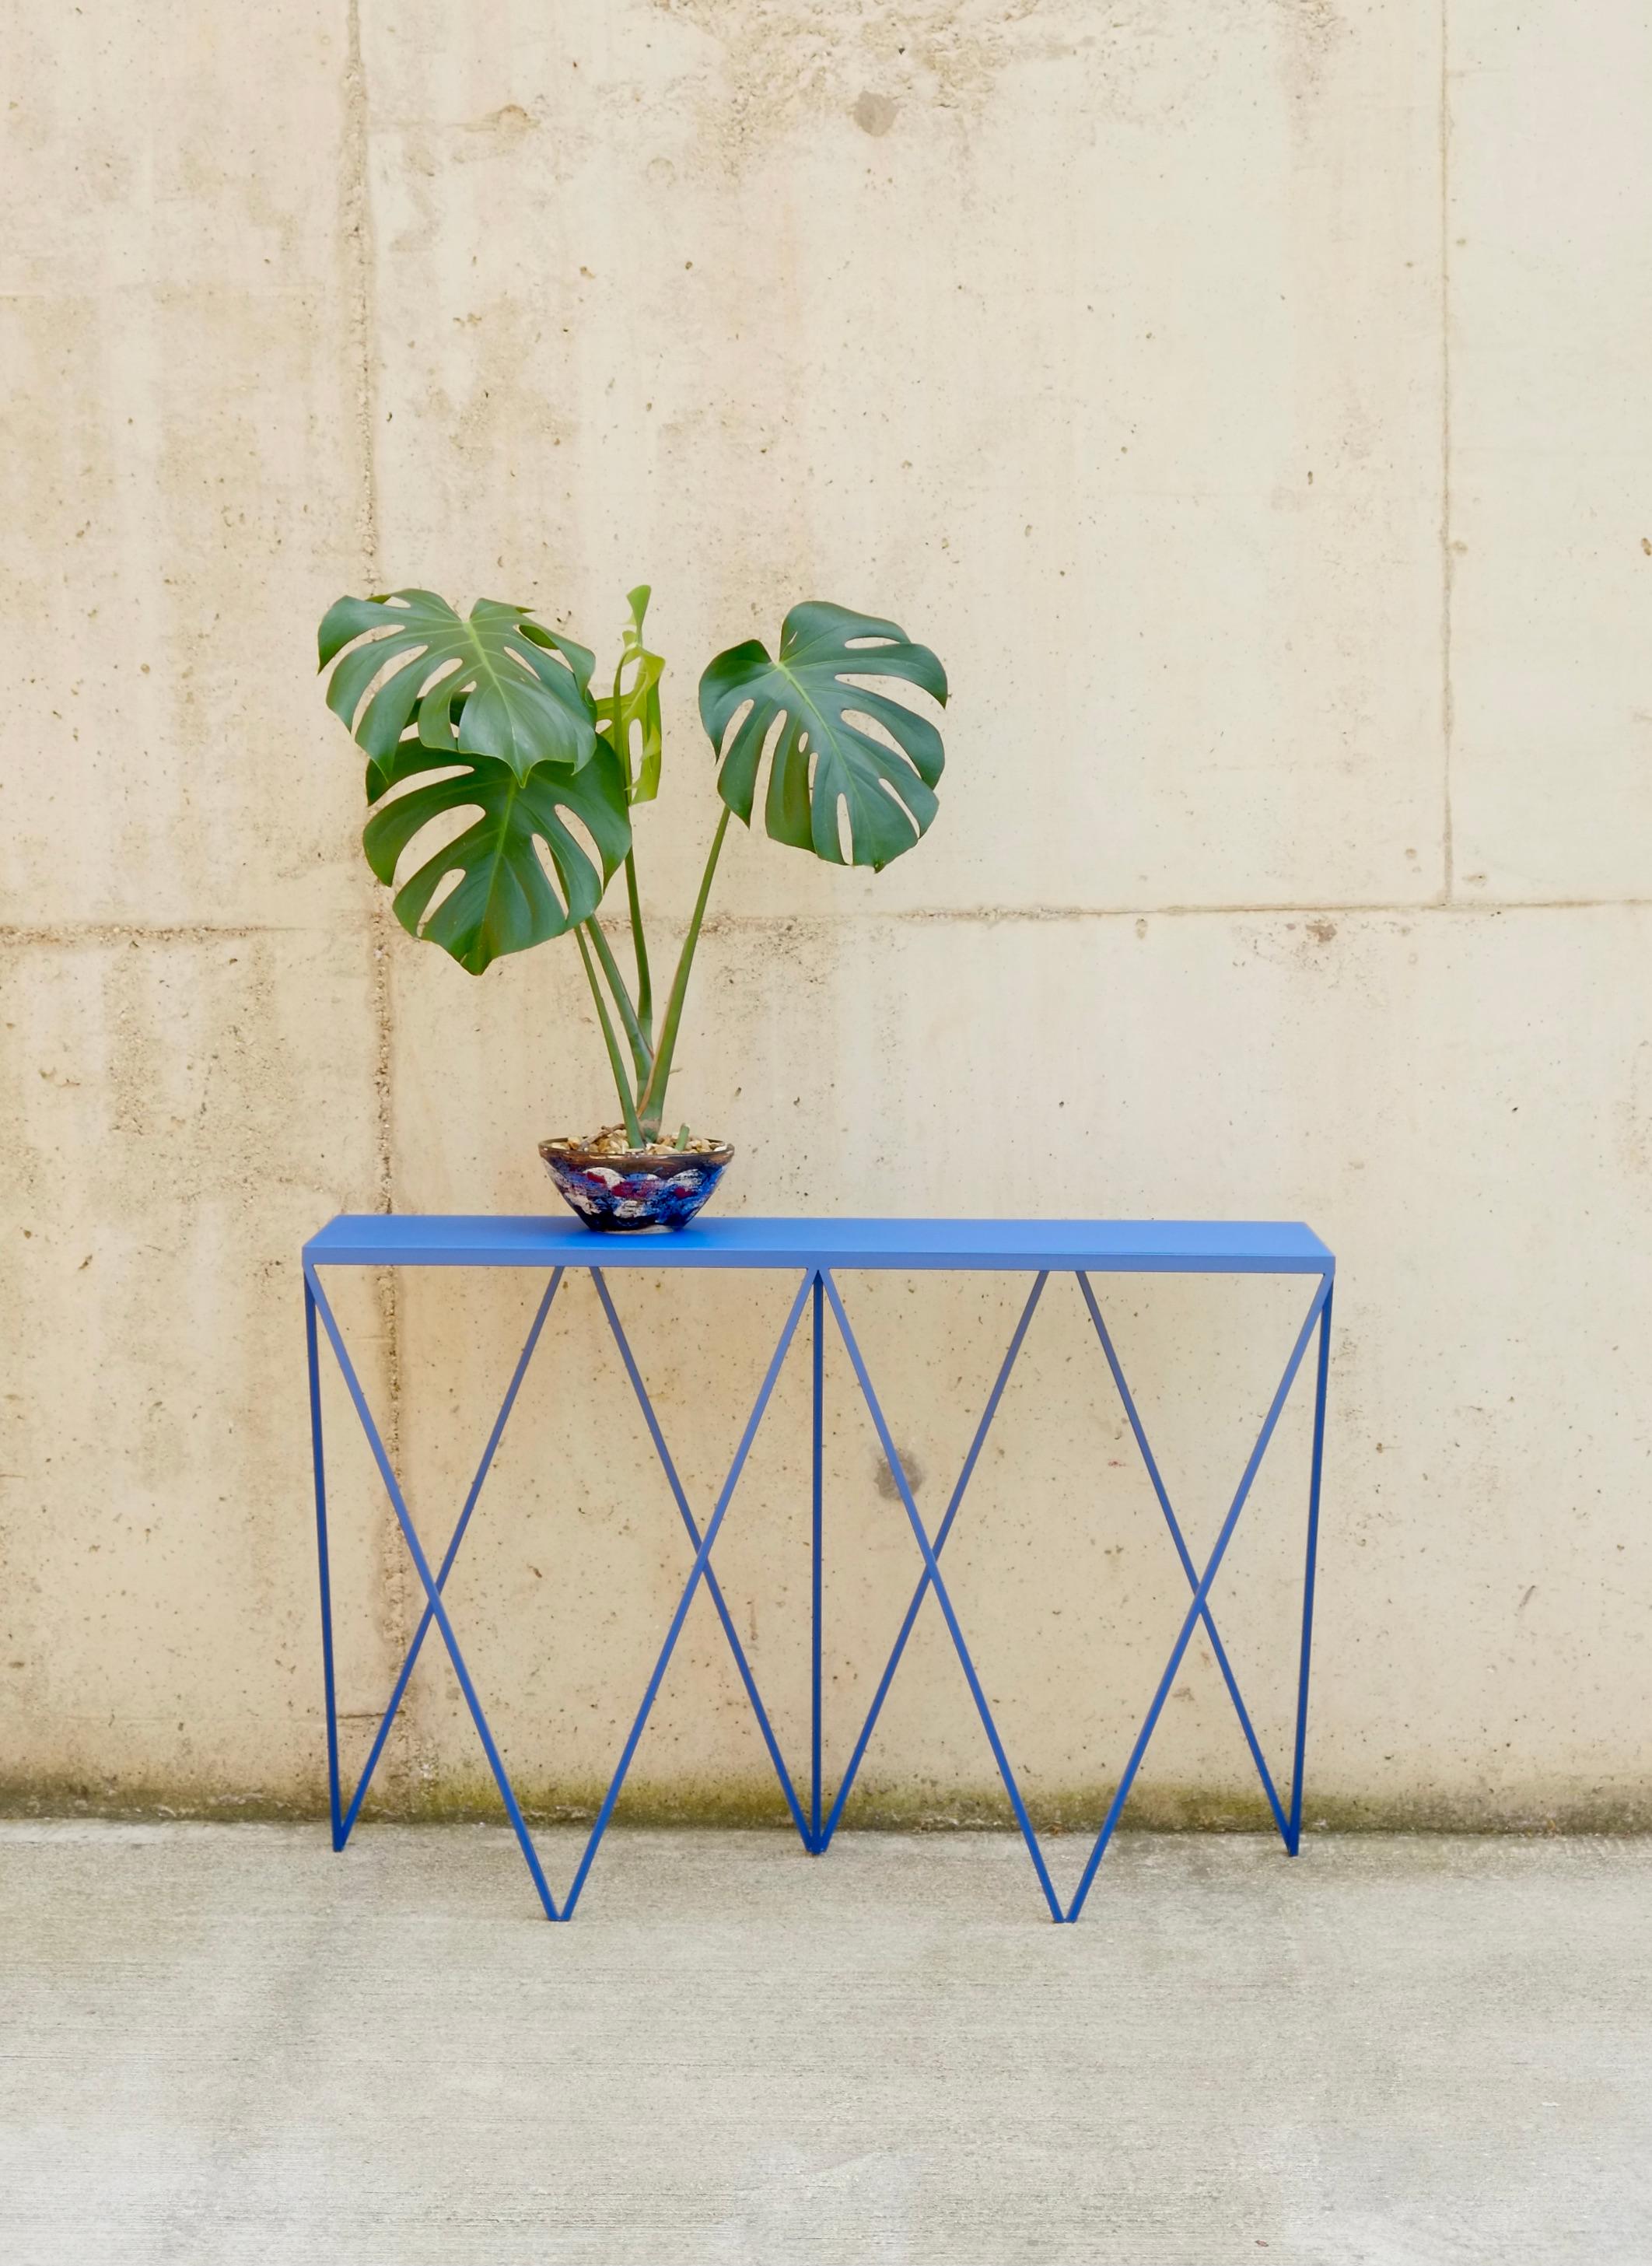 A bold blue Giraffe Console Table made with a powder coated steel frame and a color matched linoleum table top. The top is made out of environmentally friendly linoleum. The linoleum top is produced from a very finely ground linoleum granulate